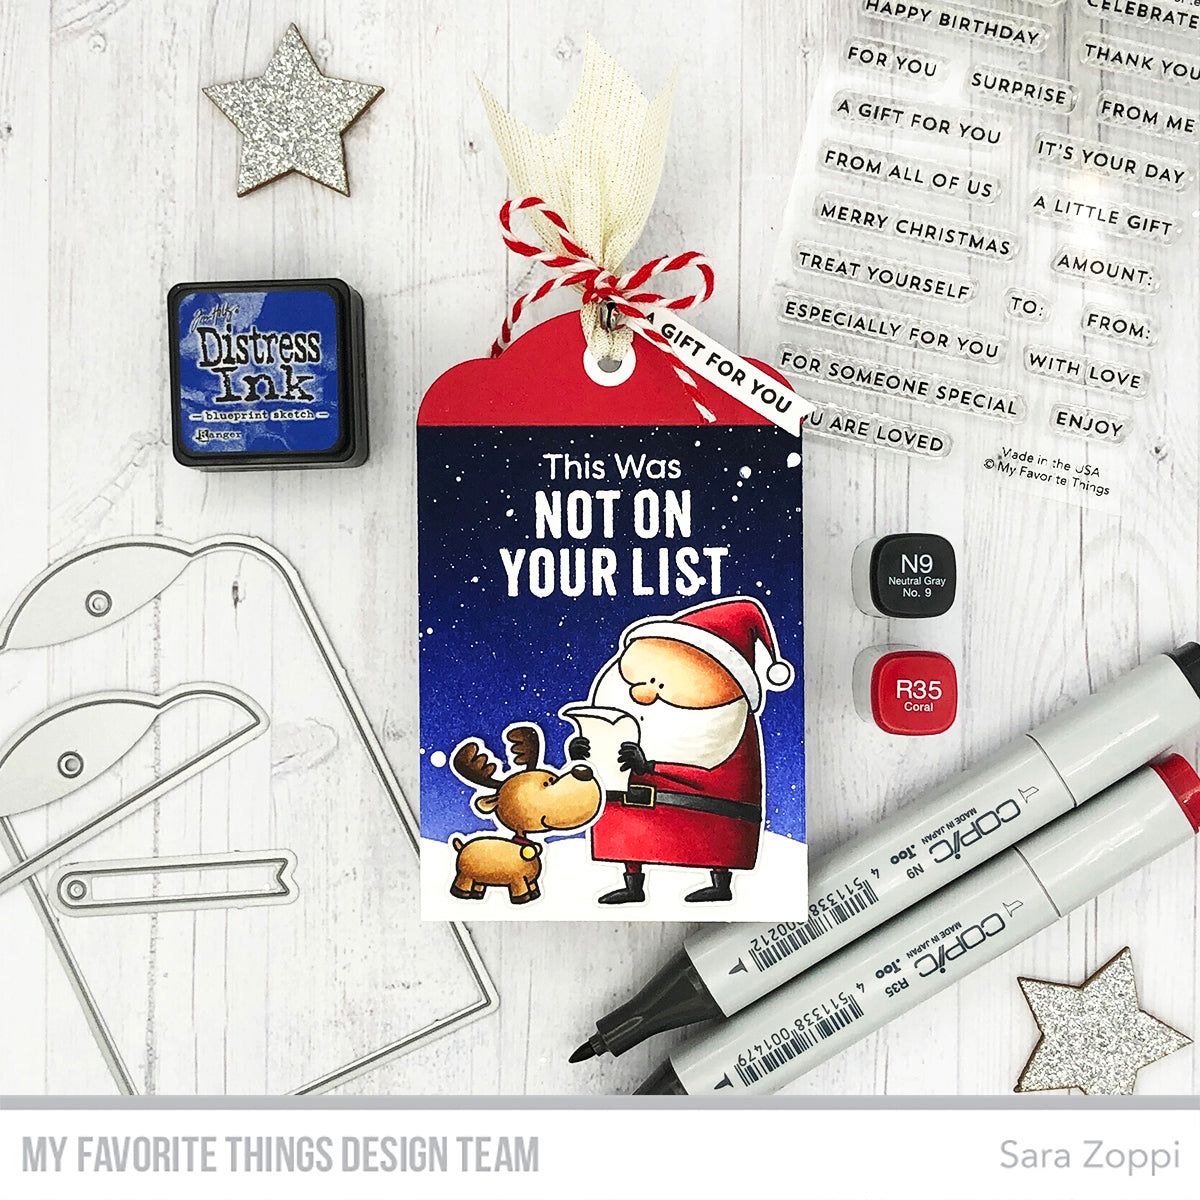 Handmade tags from Sara Zoppi featuring products from My Favorite Things #mftstamps